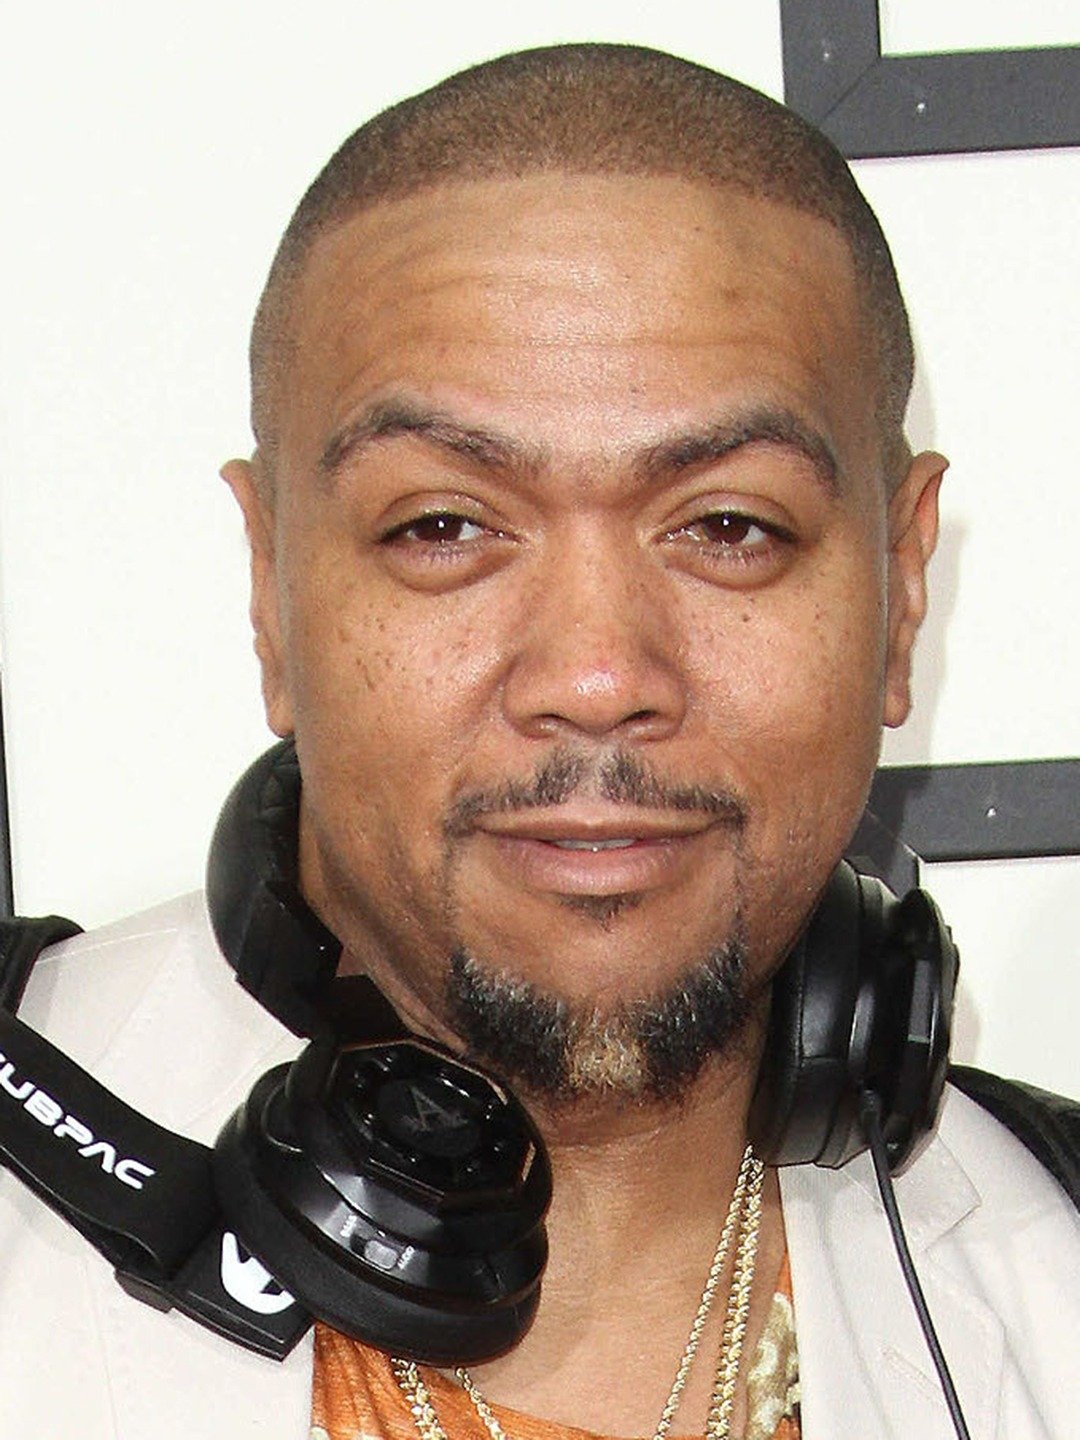 How tall is Timbaland?